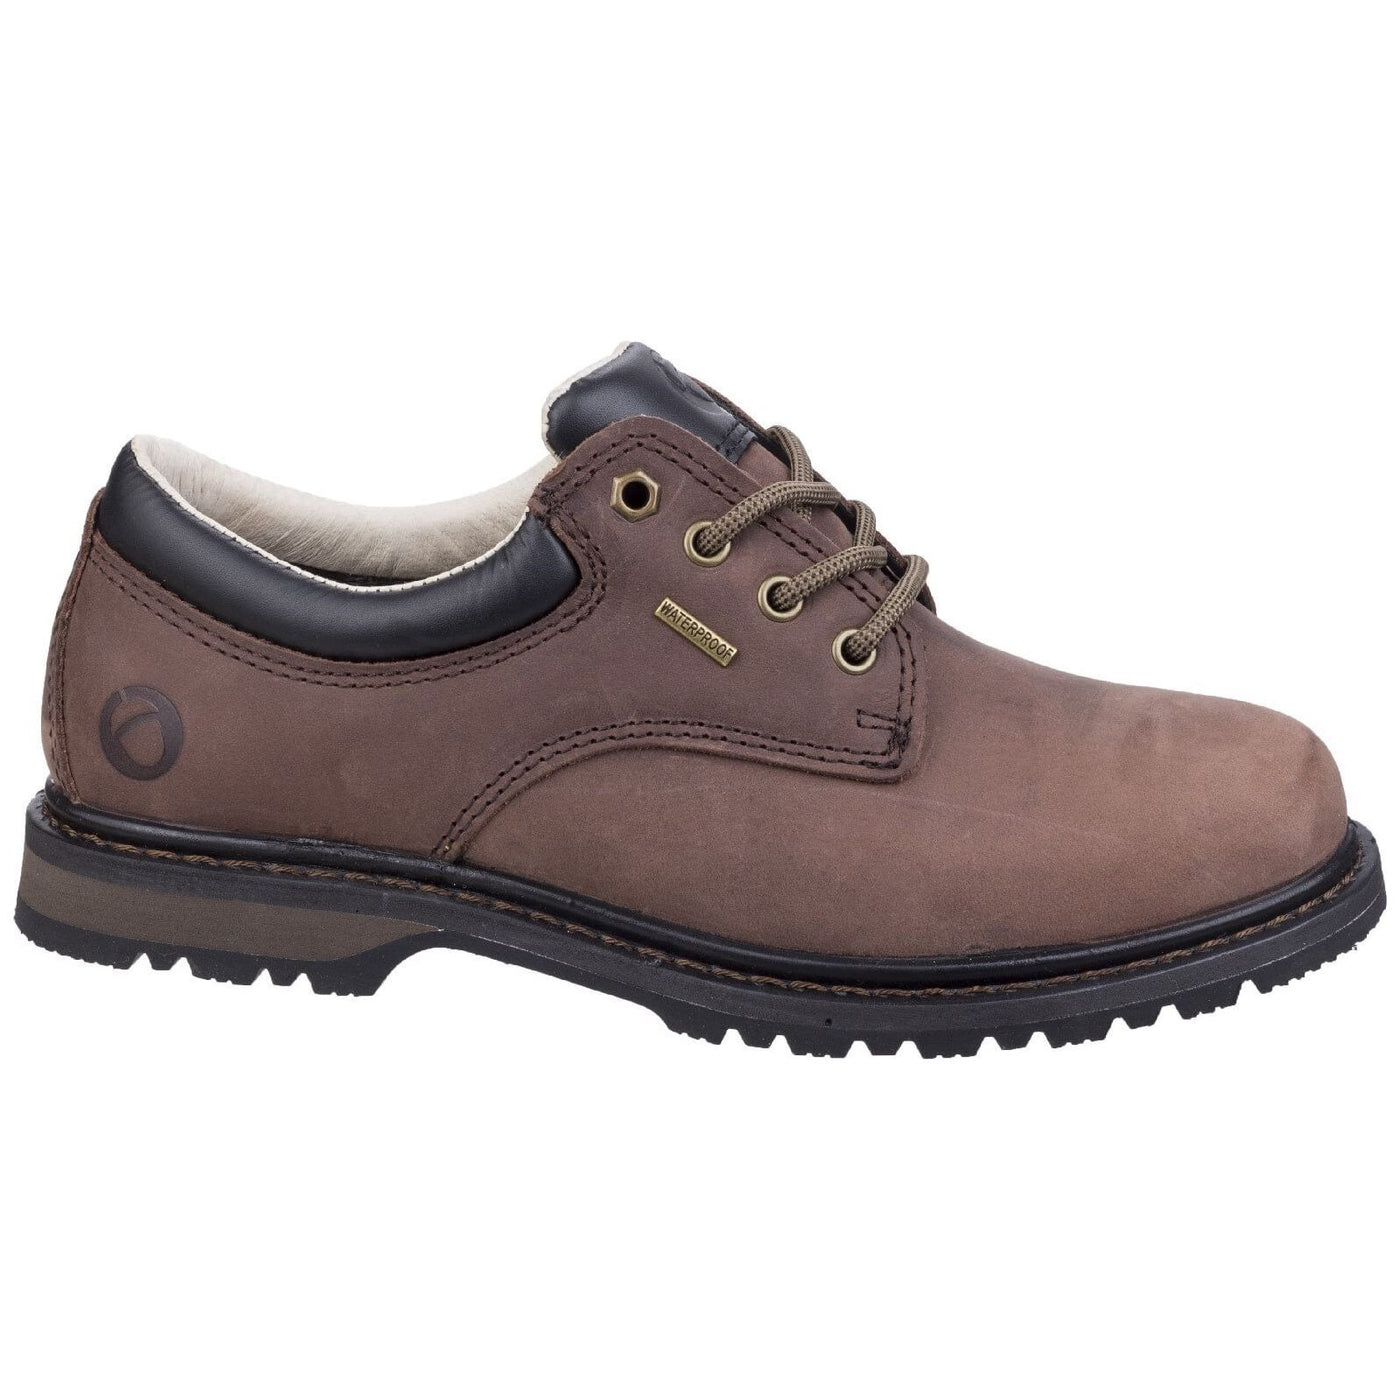 Cotswold Stonesfield Hiking Shoes-Crazy horse-4